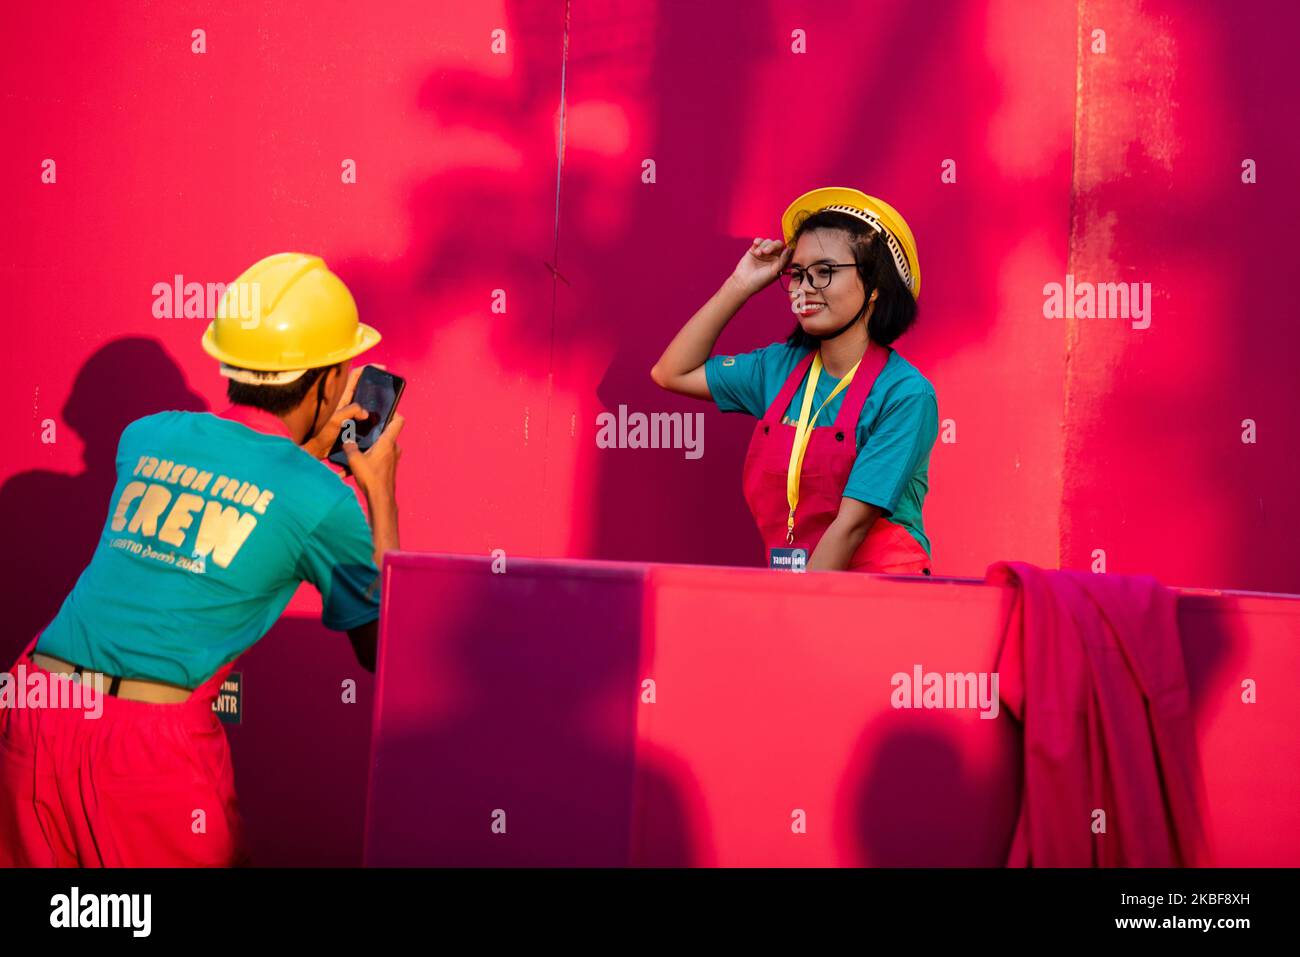 A girl takes photograph during the ”&Proud' LGBT festival in Yangon, Myanmar on 24 January, 2020. (Photo by Shwe Paw Mya Tin/NurPhoto) Stock Photo